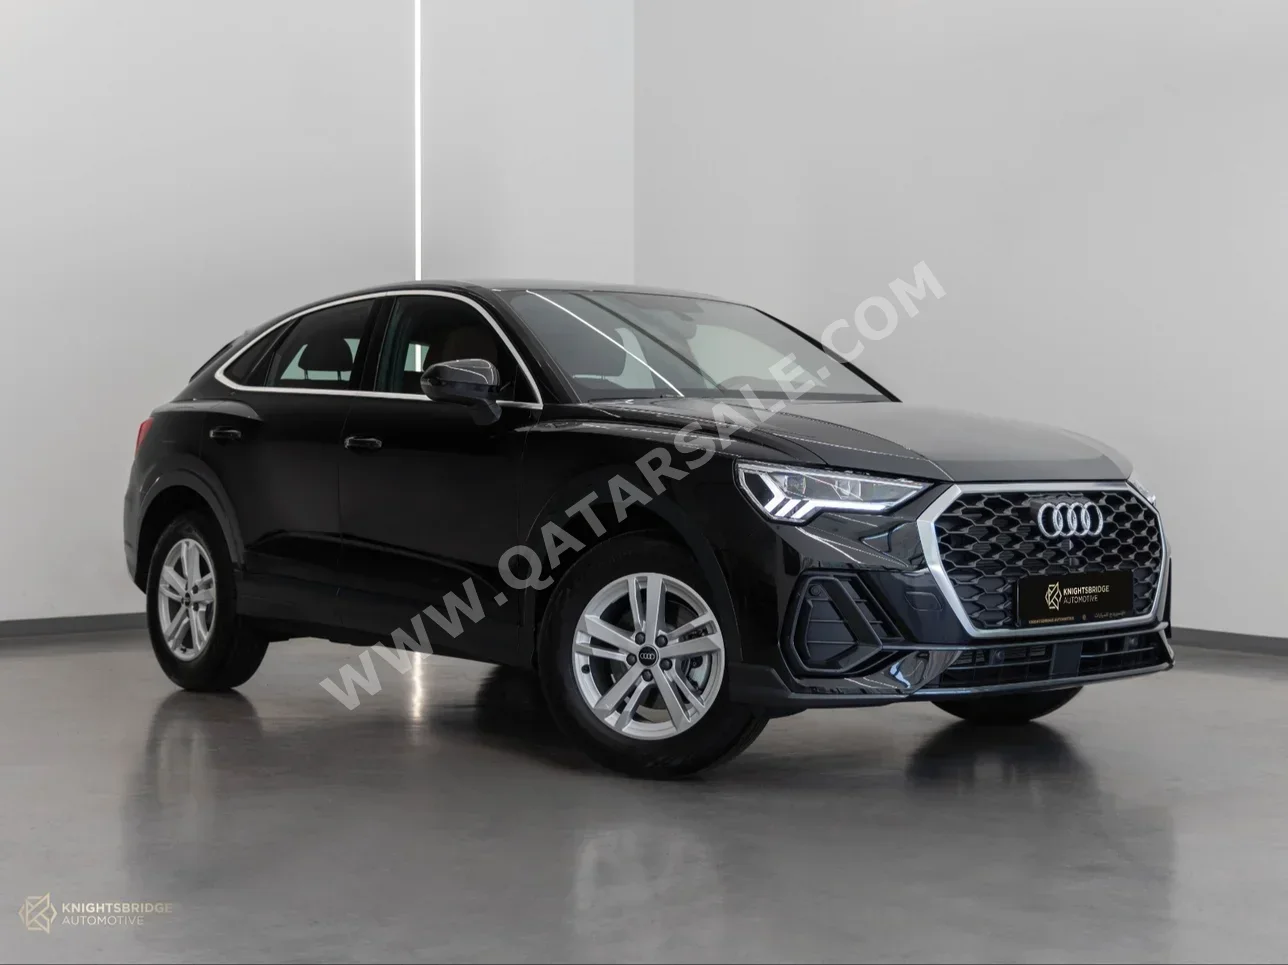 Audi  Q3  2023  Automatic  0 Km  4 Cylinder  Front Wheel Drive (FWD)  SUV  Black  With Warranty